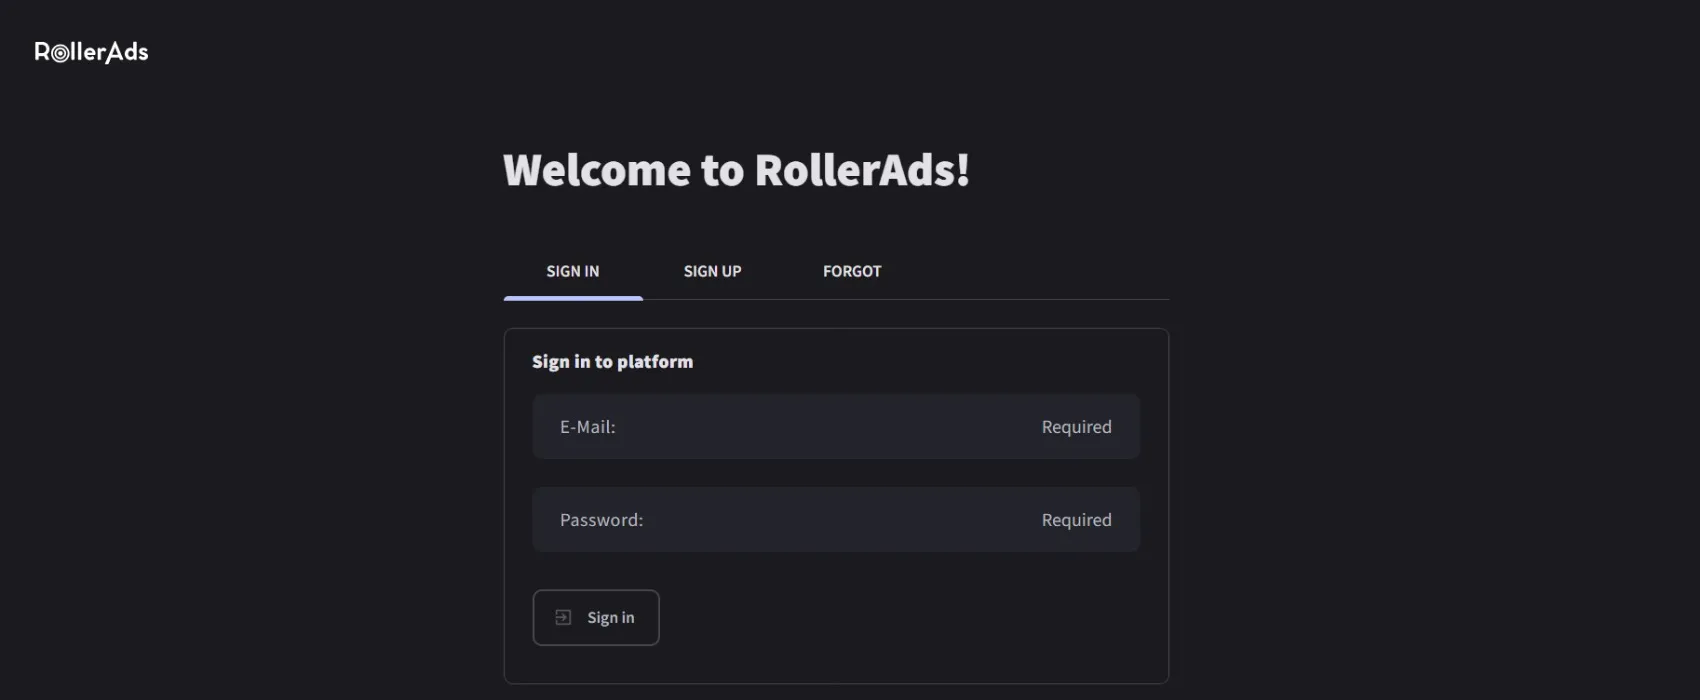 Sign in - rollerads